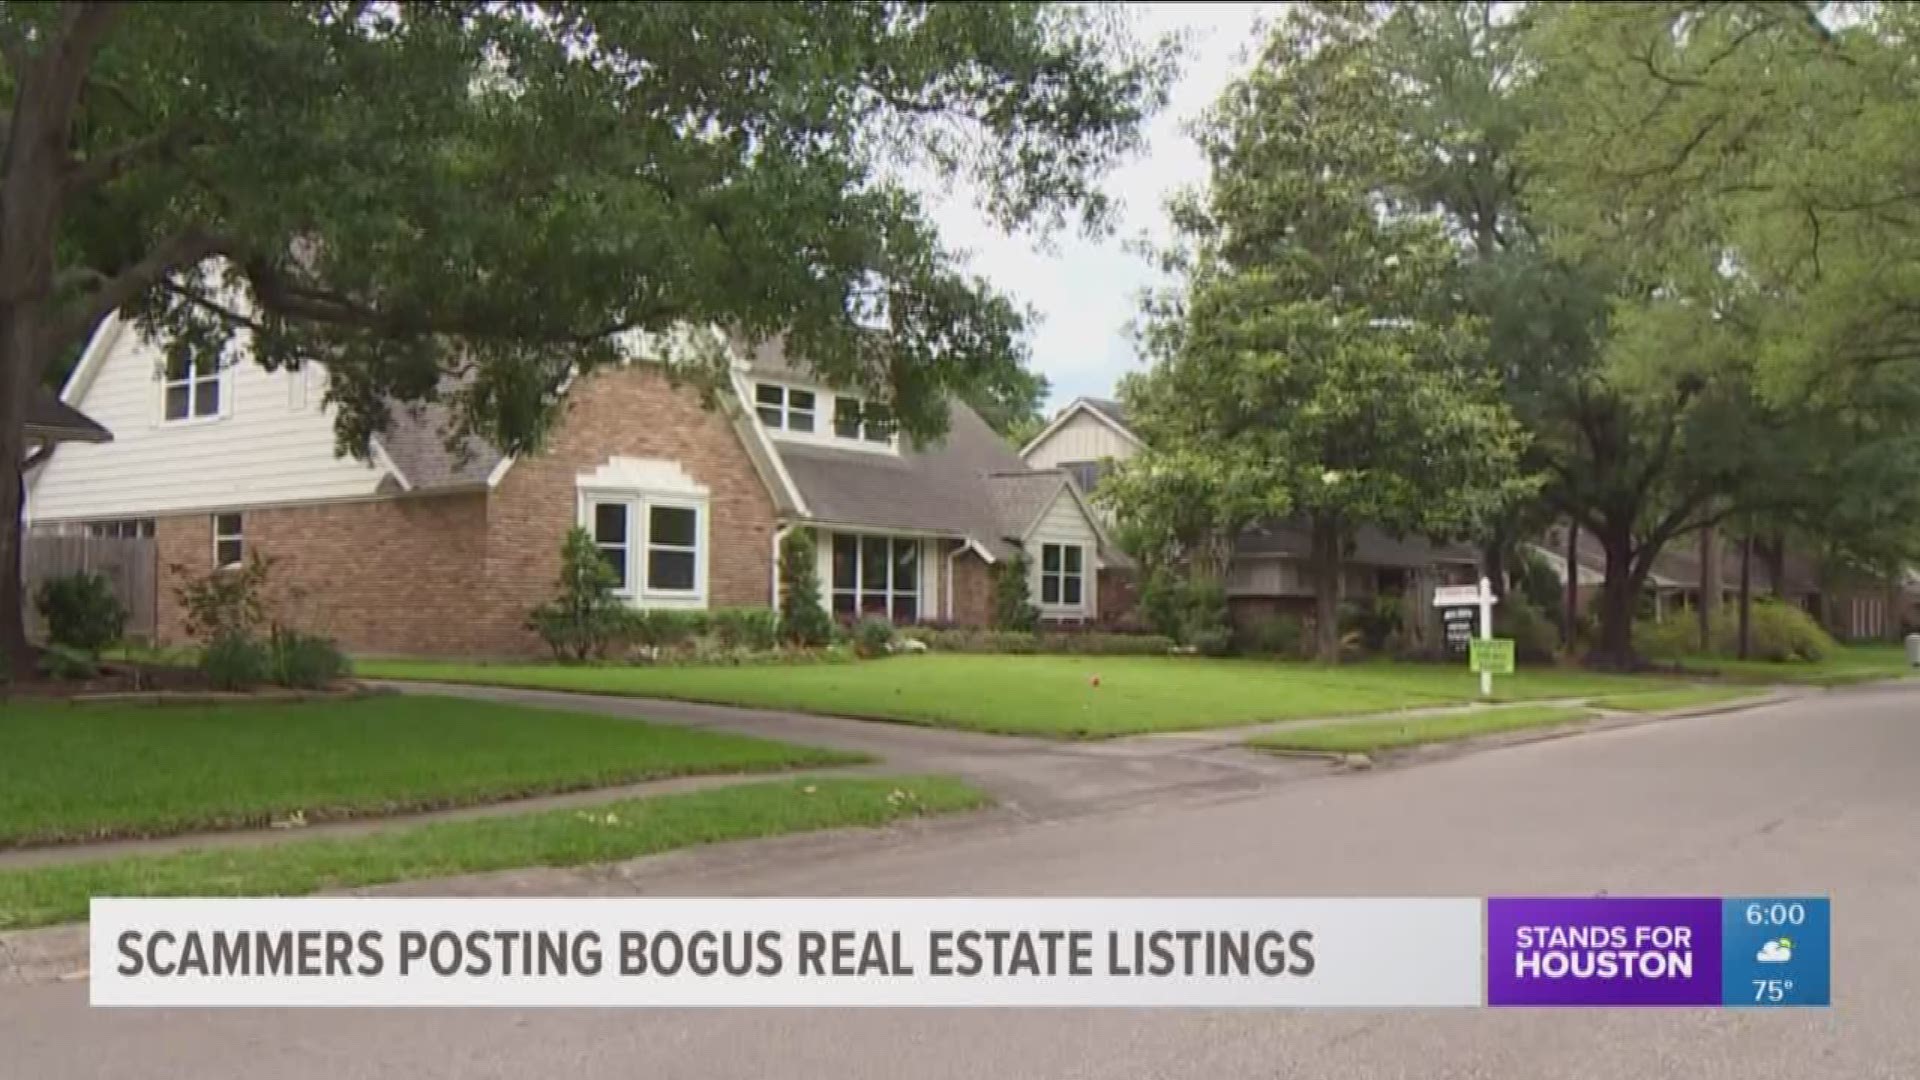 People are on the hunt for that sweet real estate deal so scammers are on the prowl too. "They're using real listings, changing the phone number and changing the name of the owners, so people think they're getting a really good deal in the area," said Bob